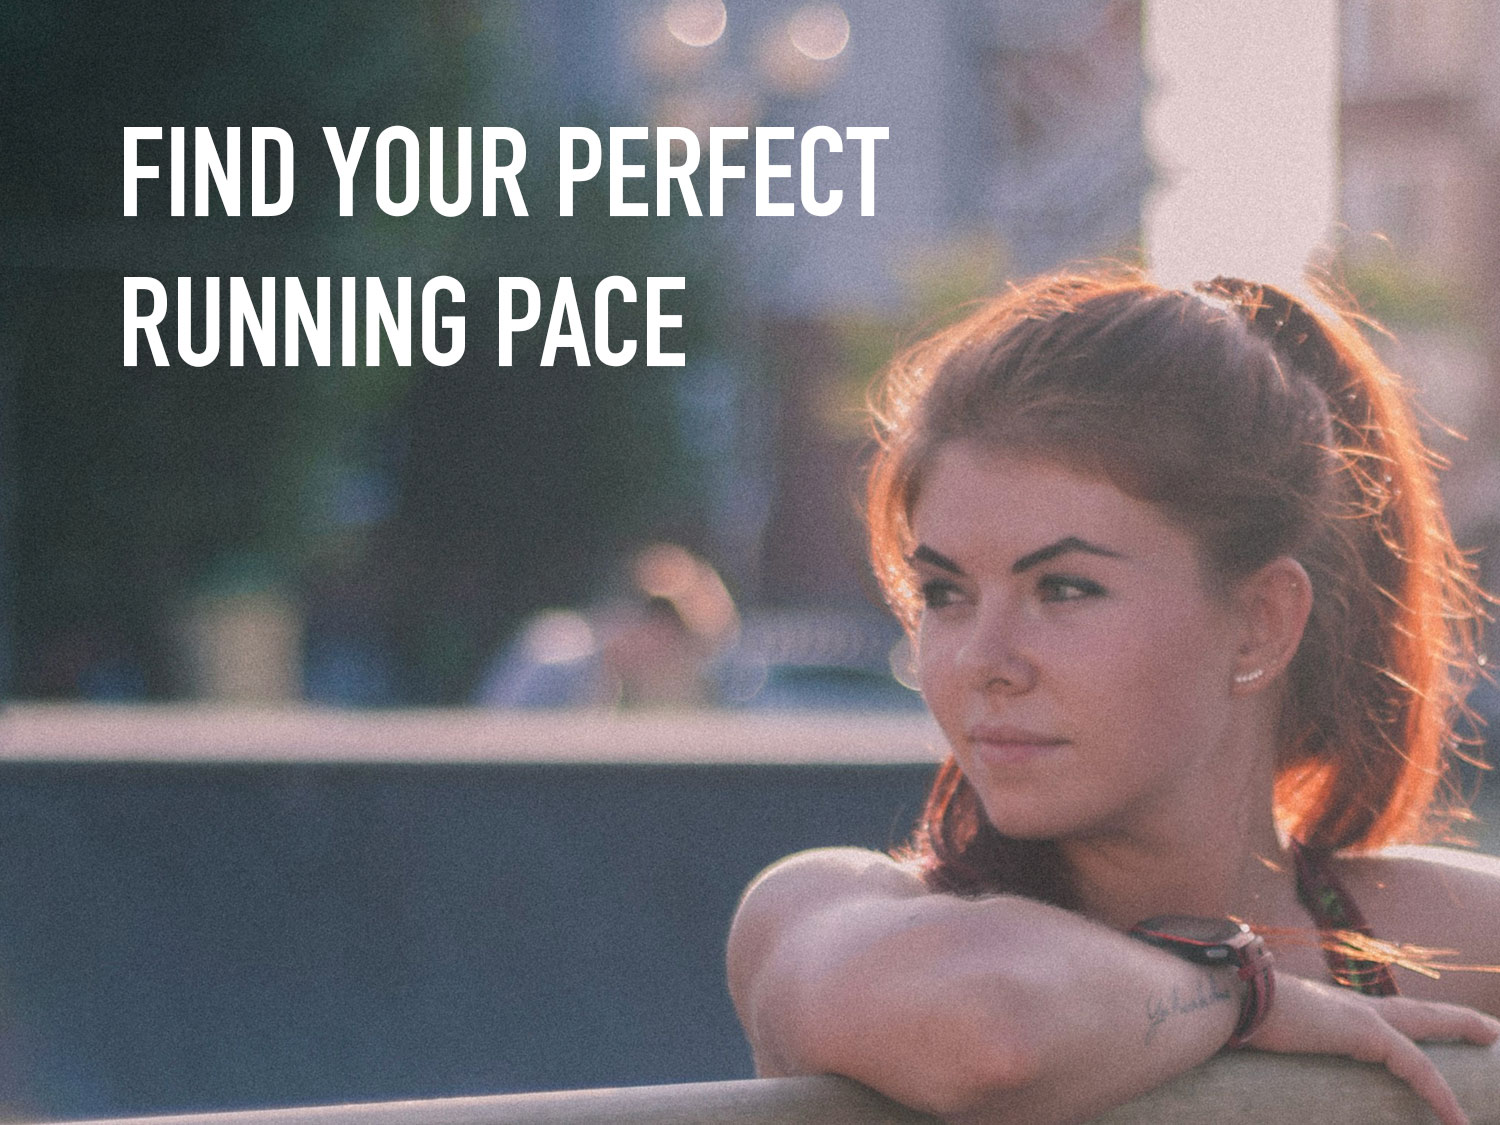 Find Your Perfect Running Pace